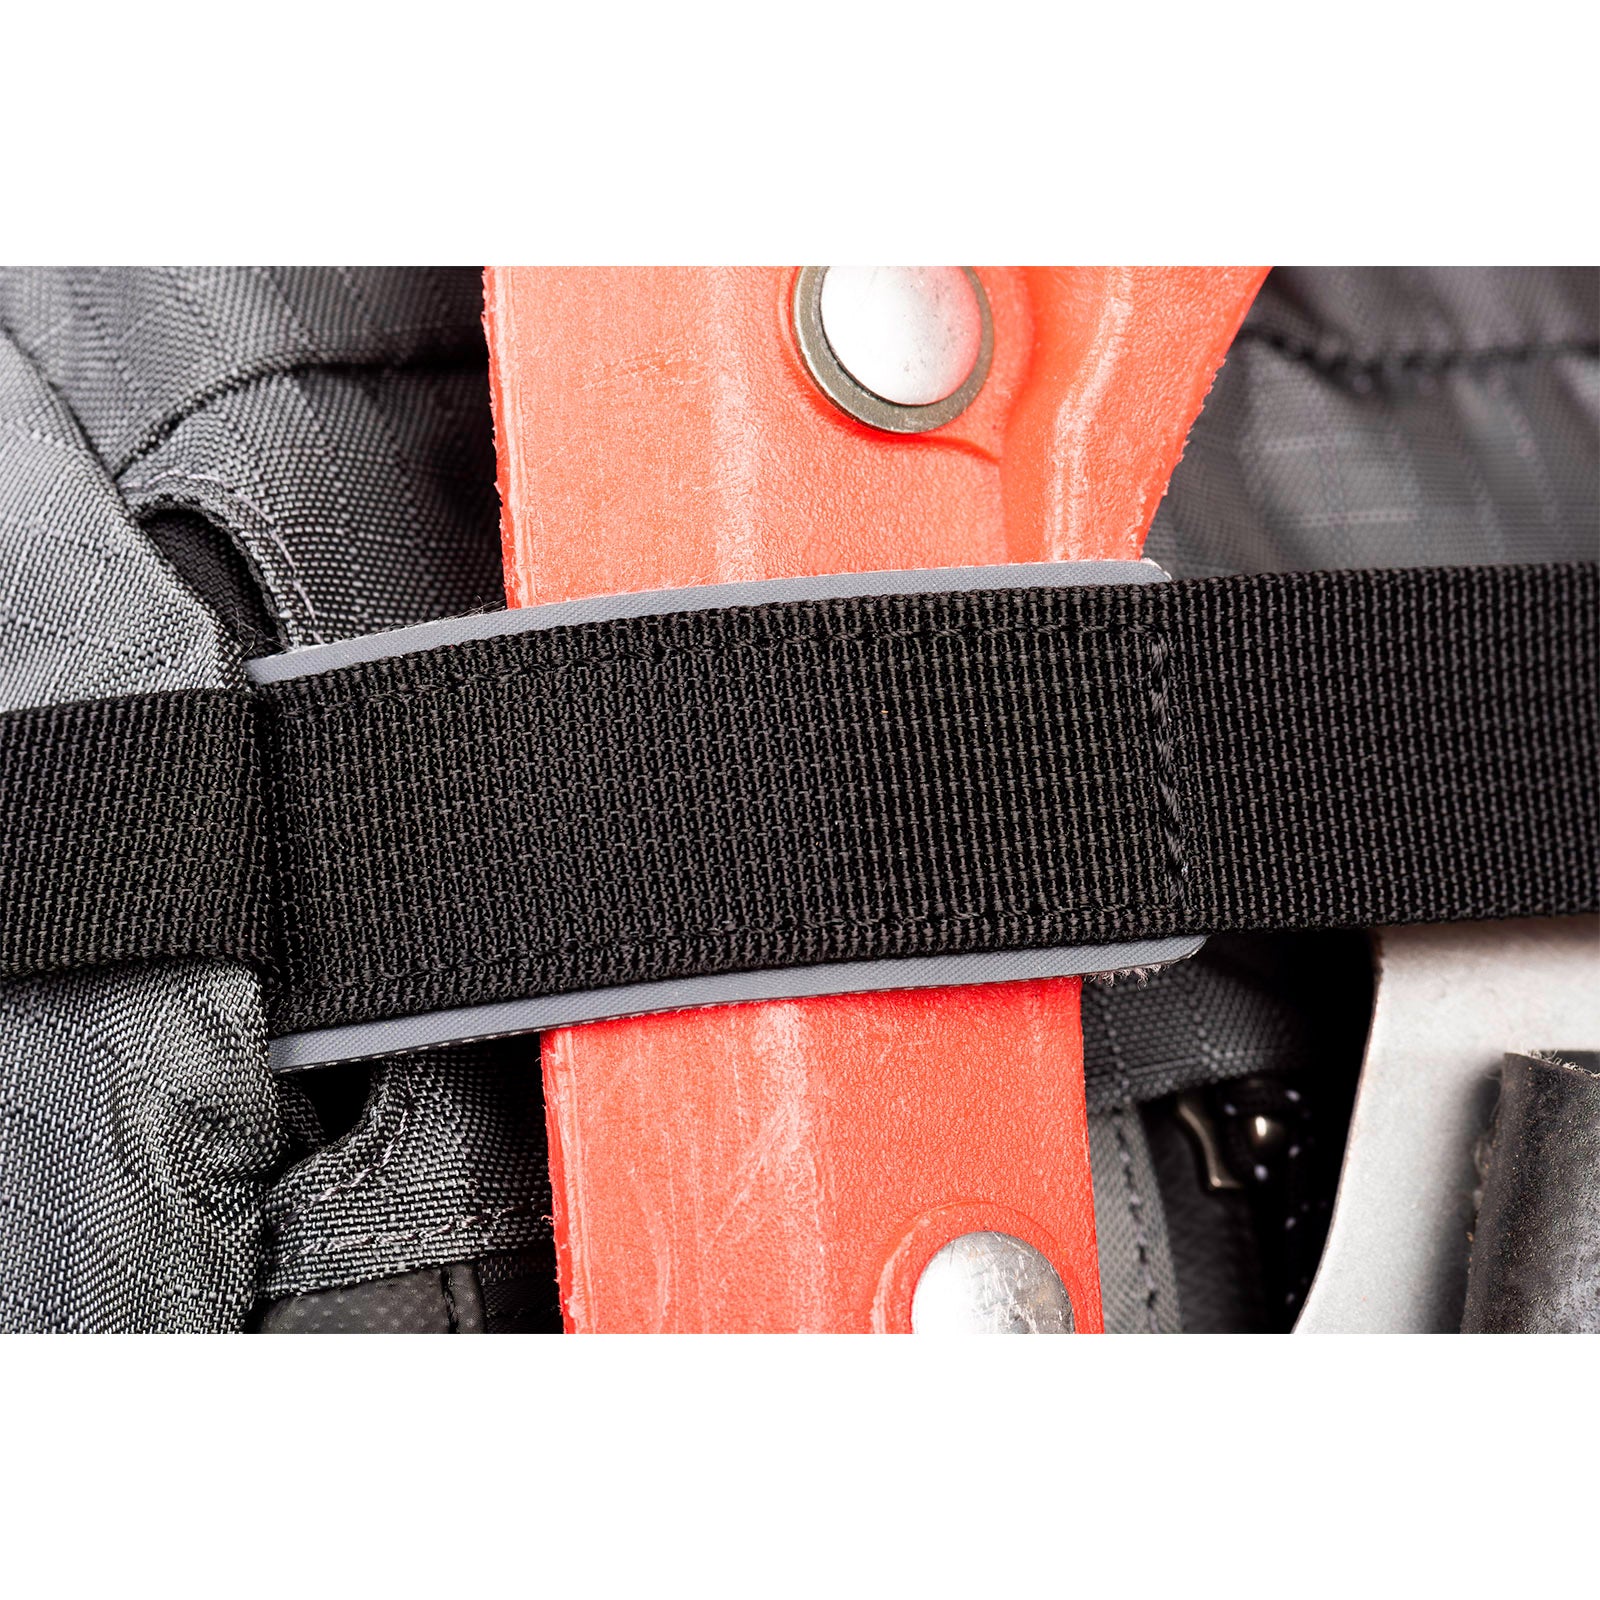 Snowboard or ski carry with tuck-away, protected edge, lash straps